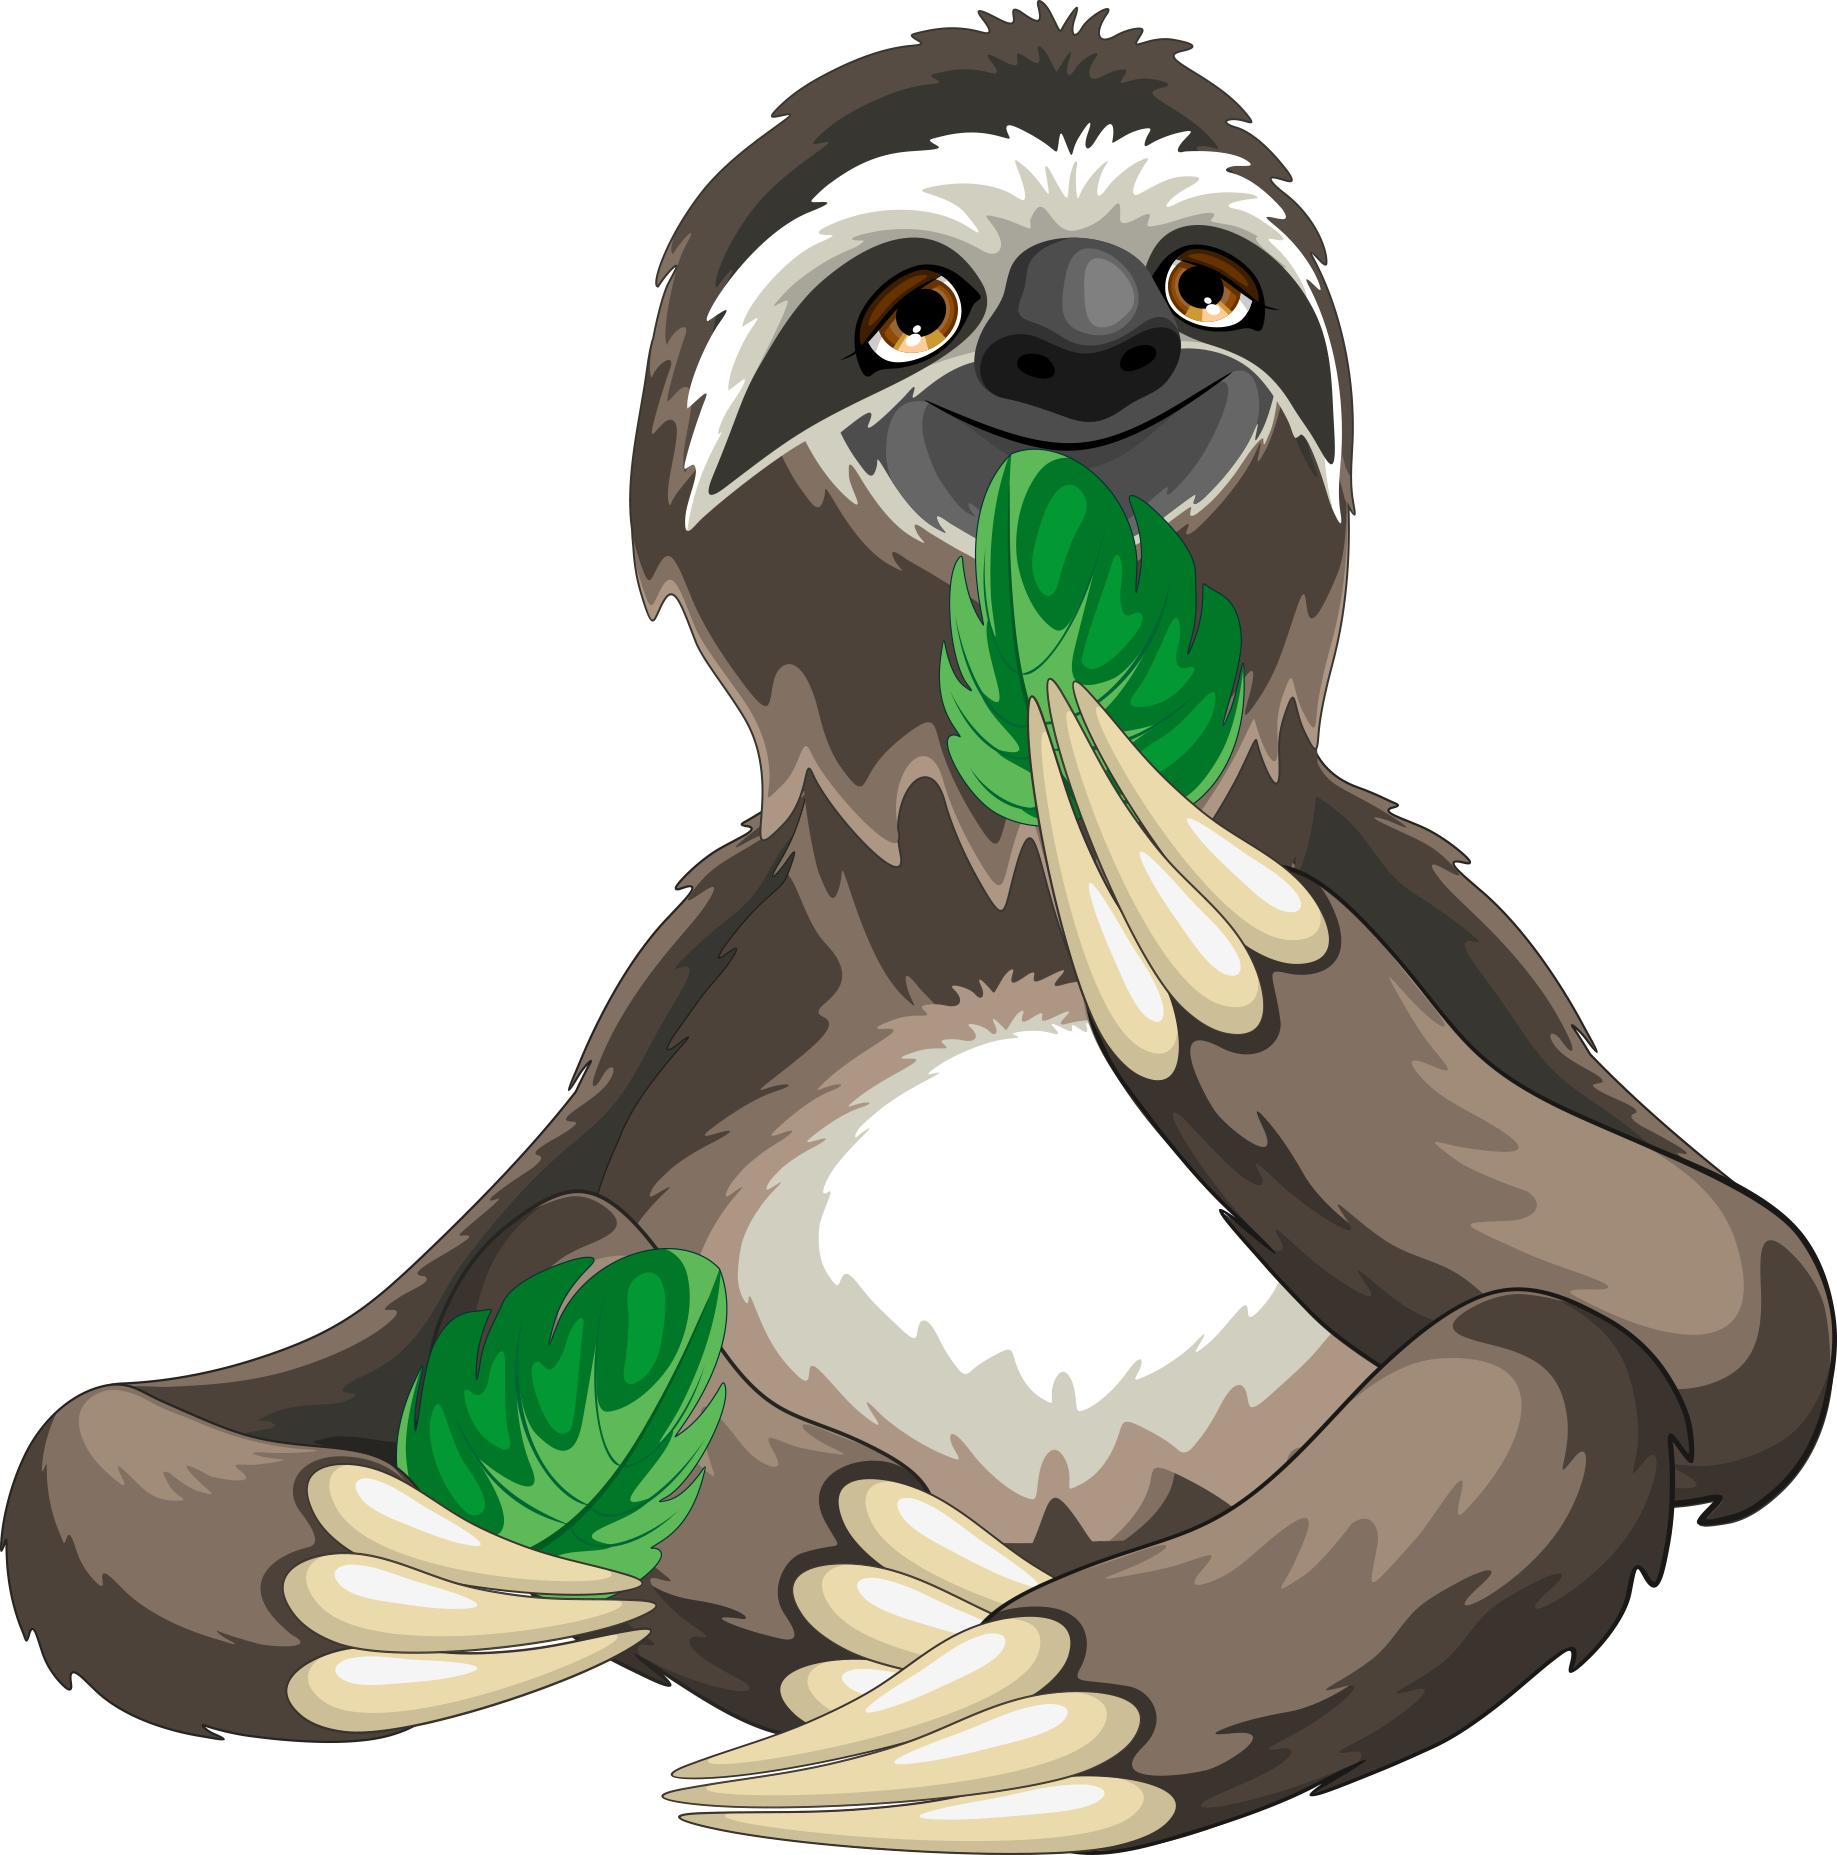 Sloth Cartoon Royalty Free Eat Leaves Png Download*1855 Transparent Sloth Png Download